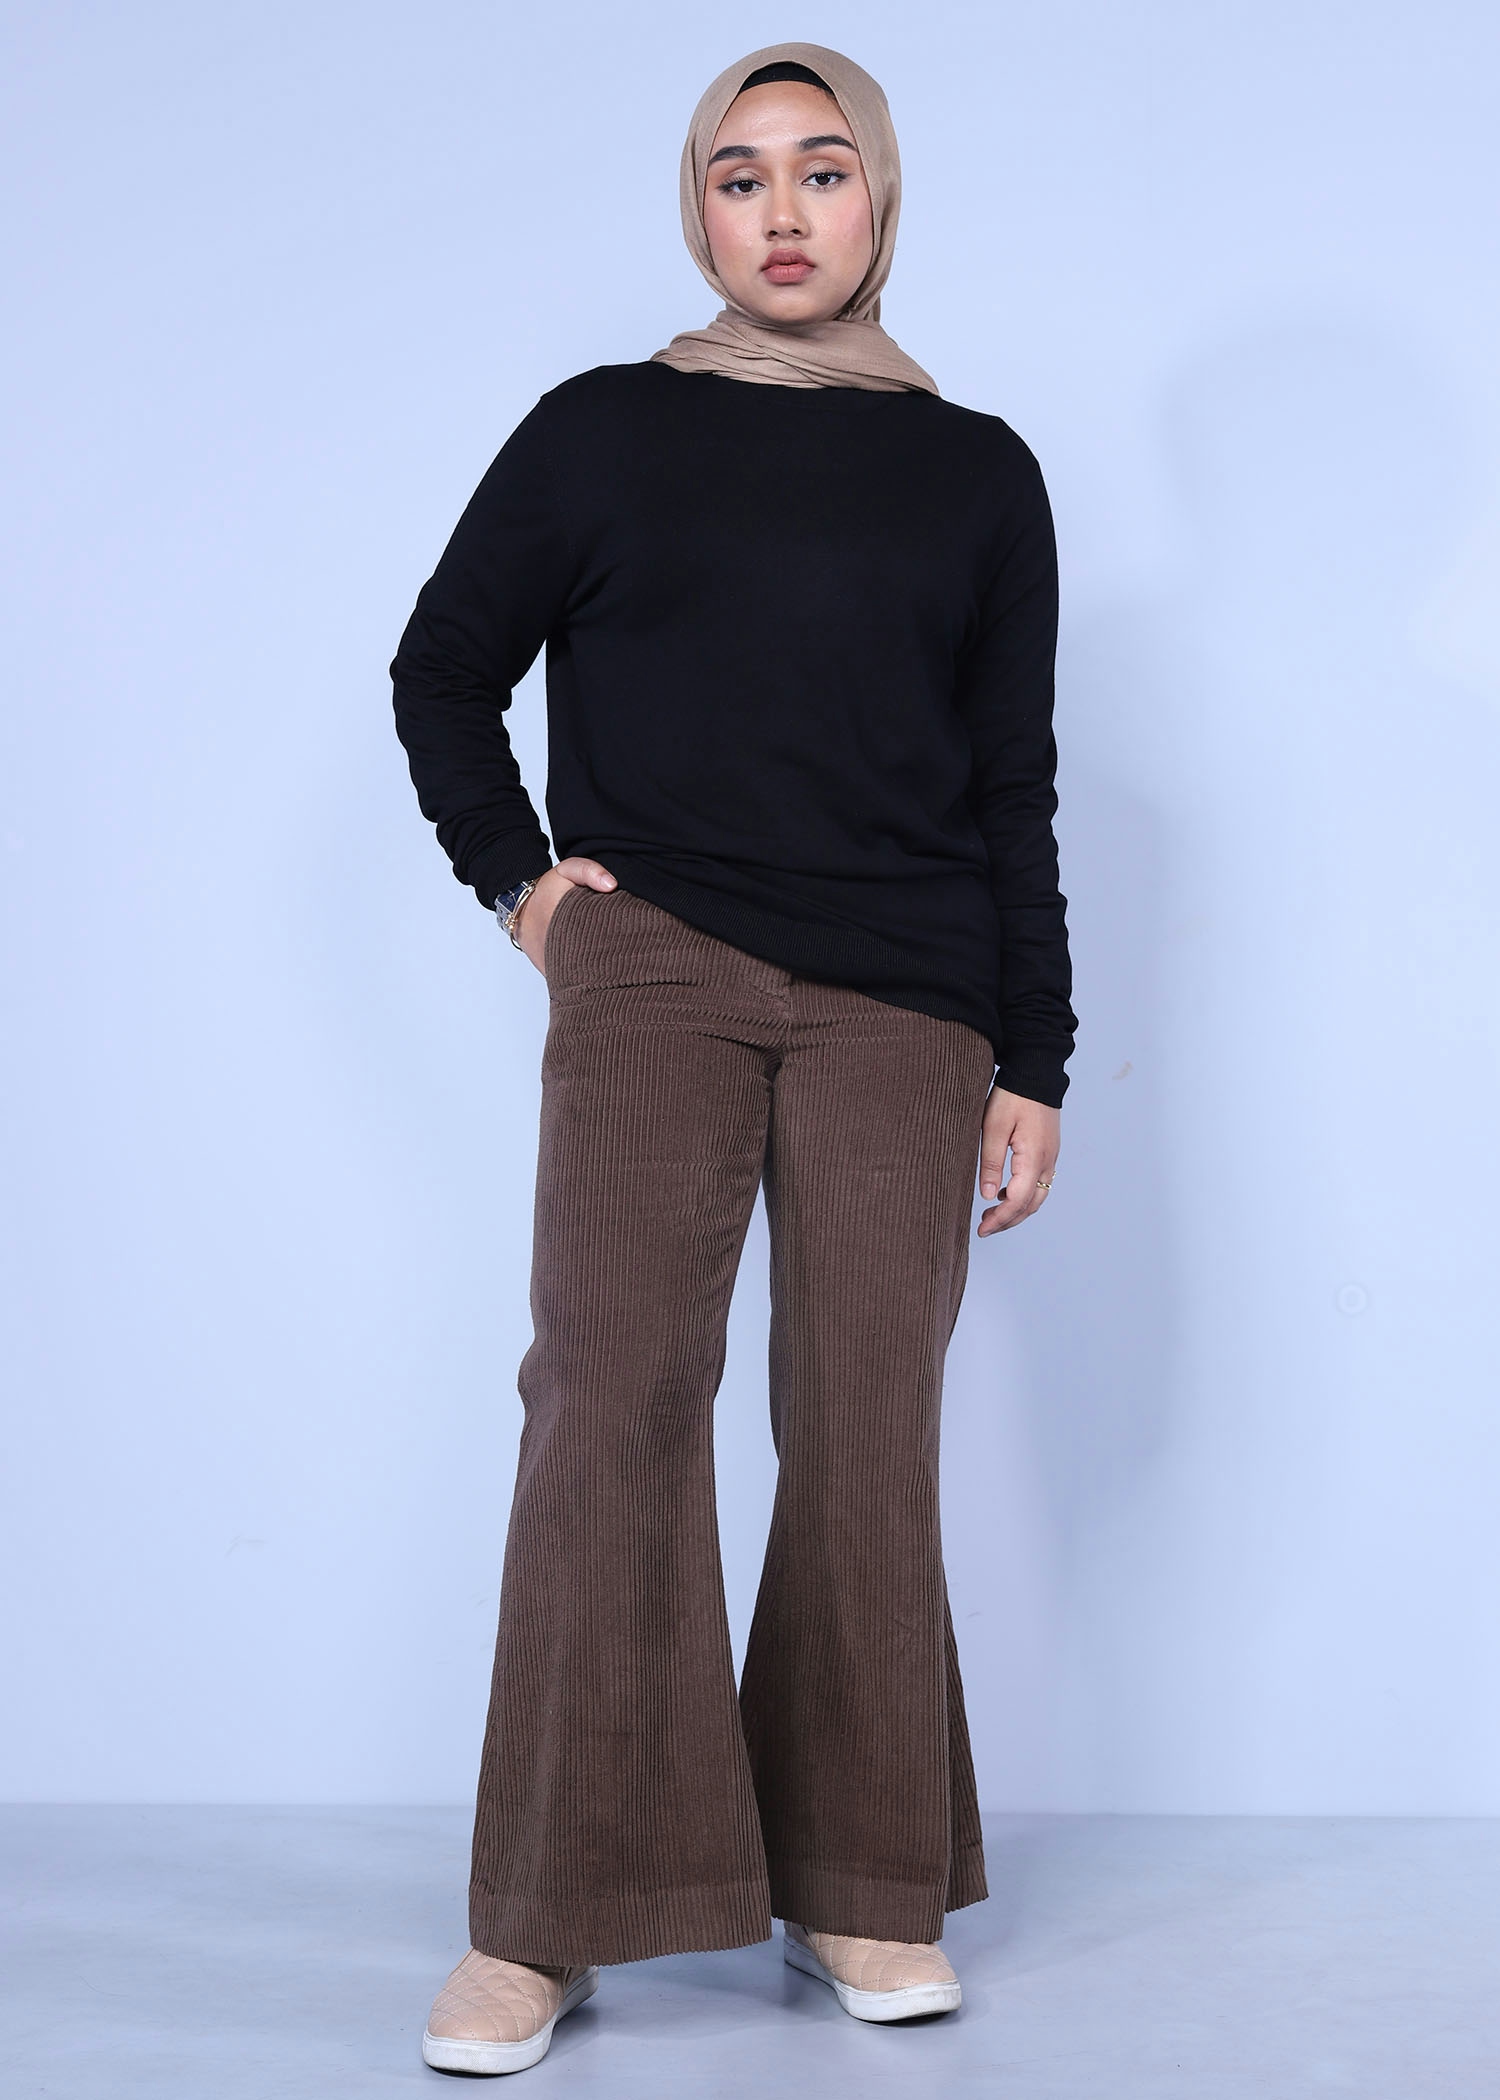 melothria corduroy ladies pant cofffee color full front view